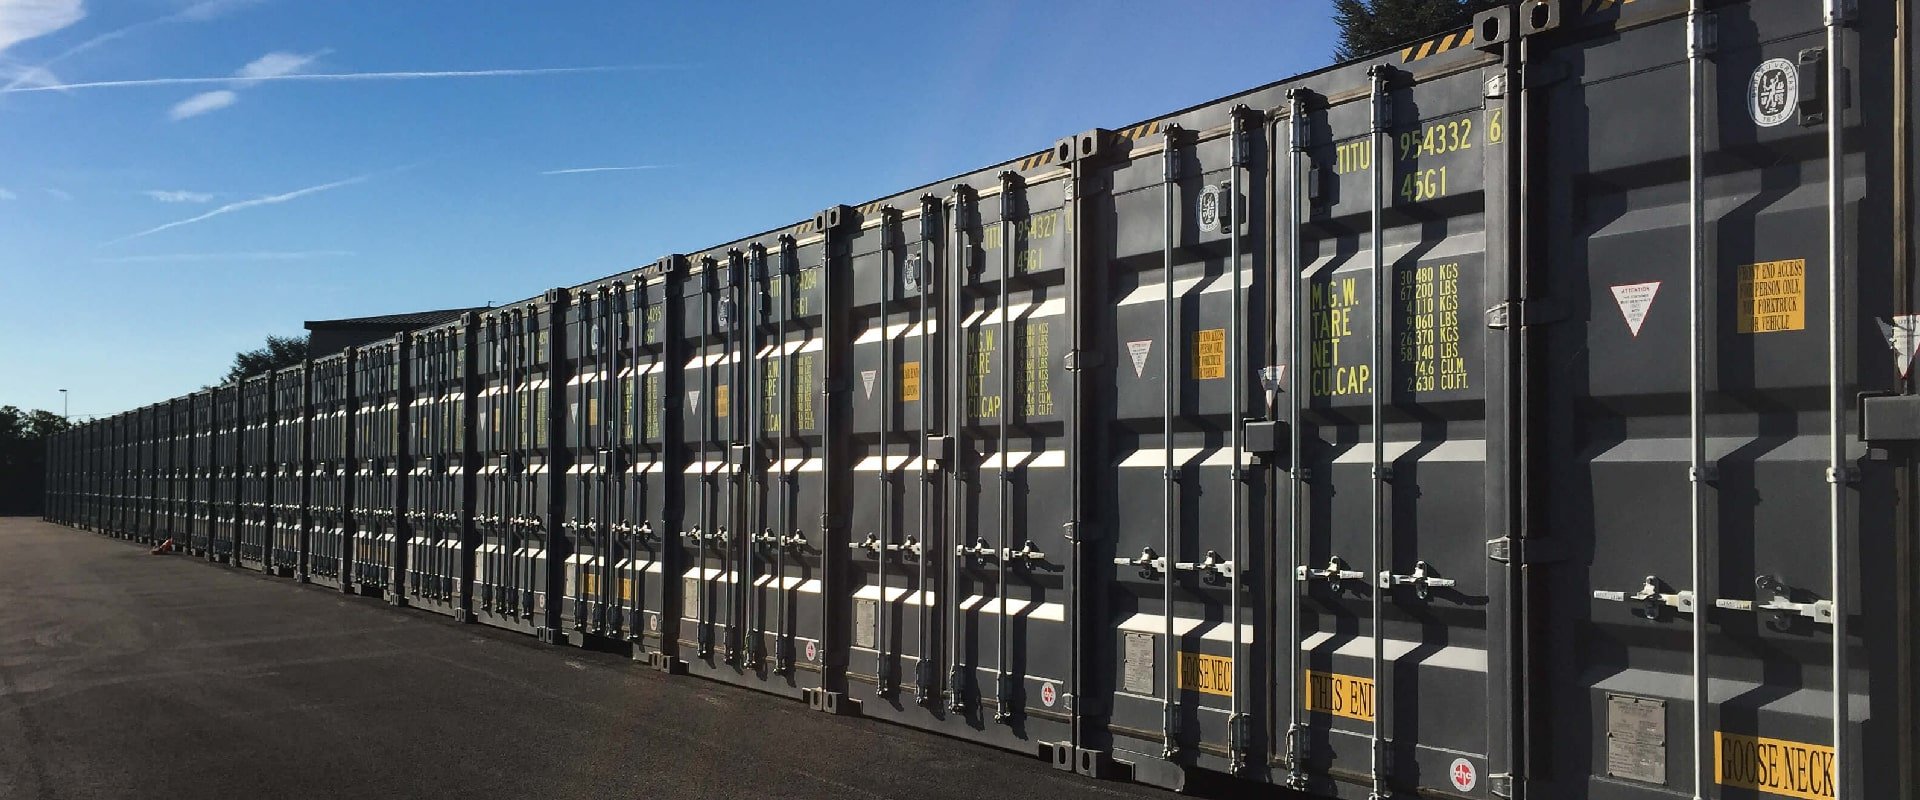 Self Storage by TITAN Containers in the UK